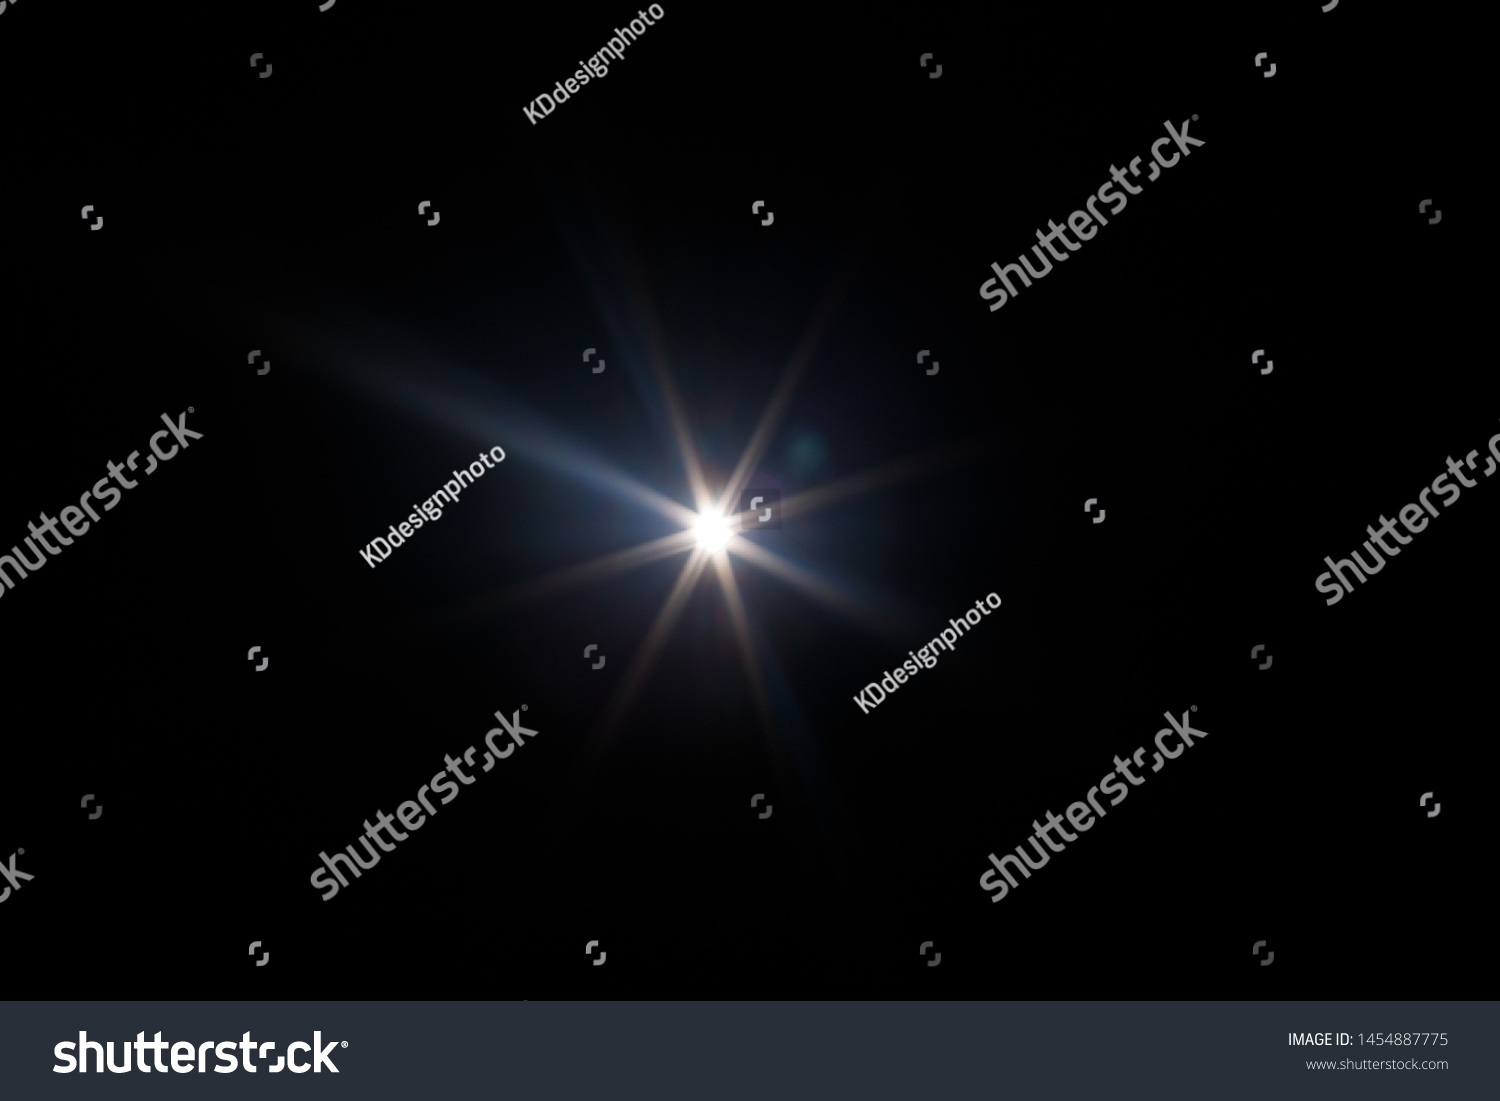 Lens Flare. Light over black background. Easy to add overlay or screen filter over photos. Abstract sun burst with digital lens flare background. Gleams rounded and hexagonal shapes, rainbow halo. #1454887775